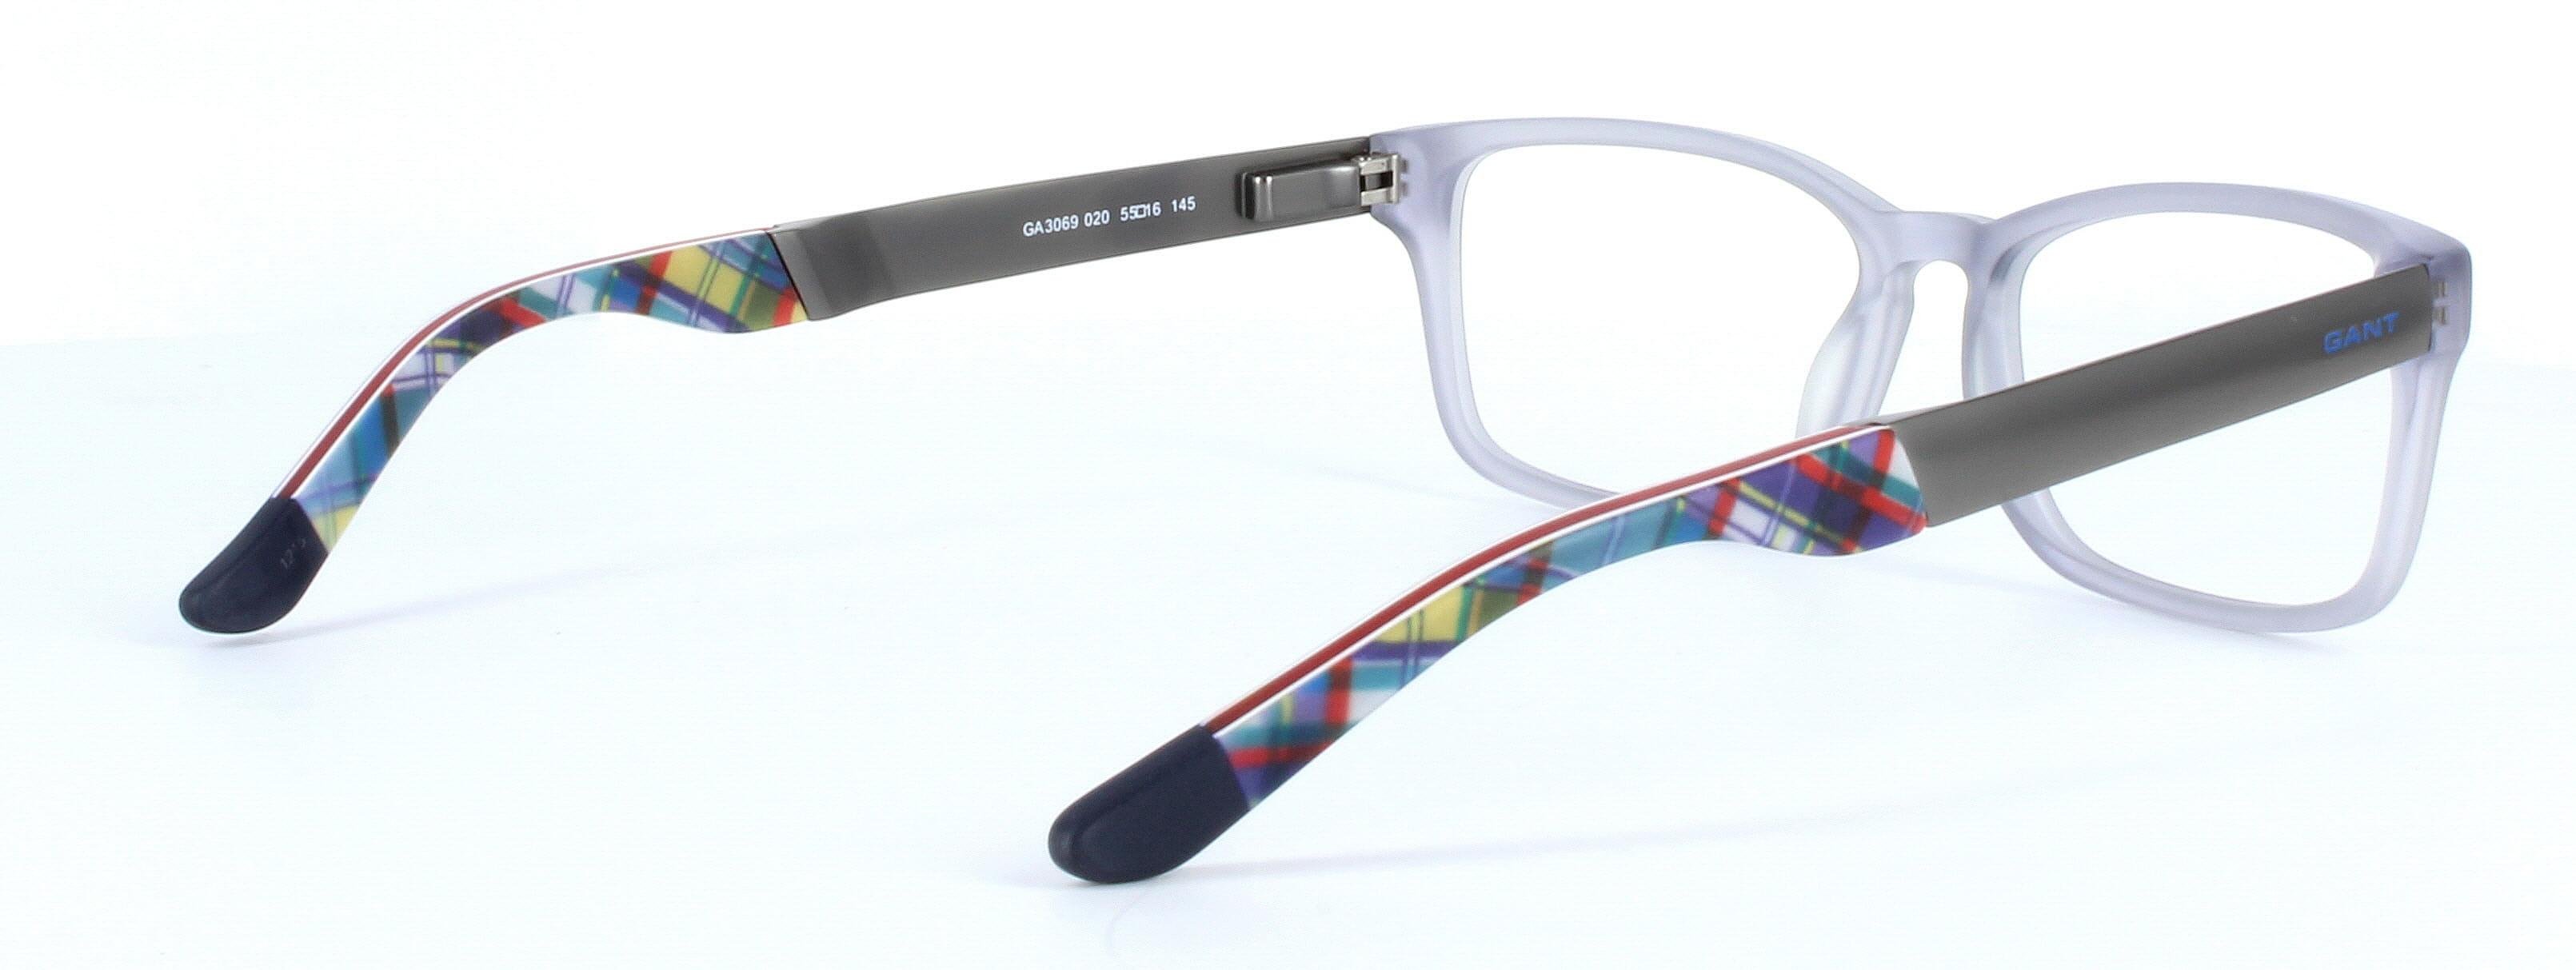 Gant 3060 020 - Unisex crystal grey acetate glasses with metal arms - image view 4